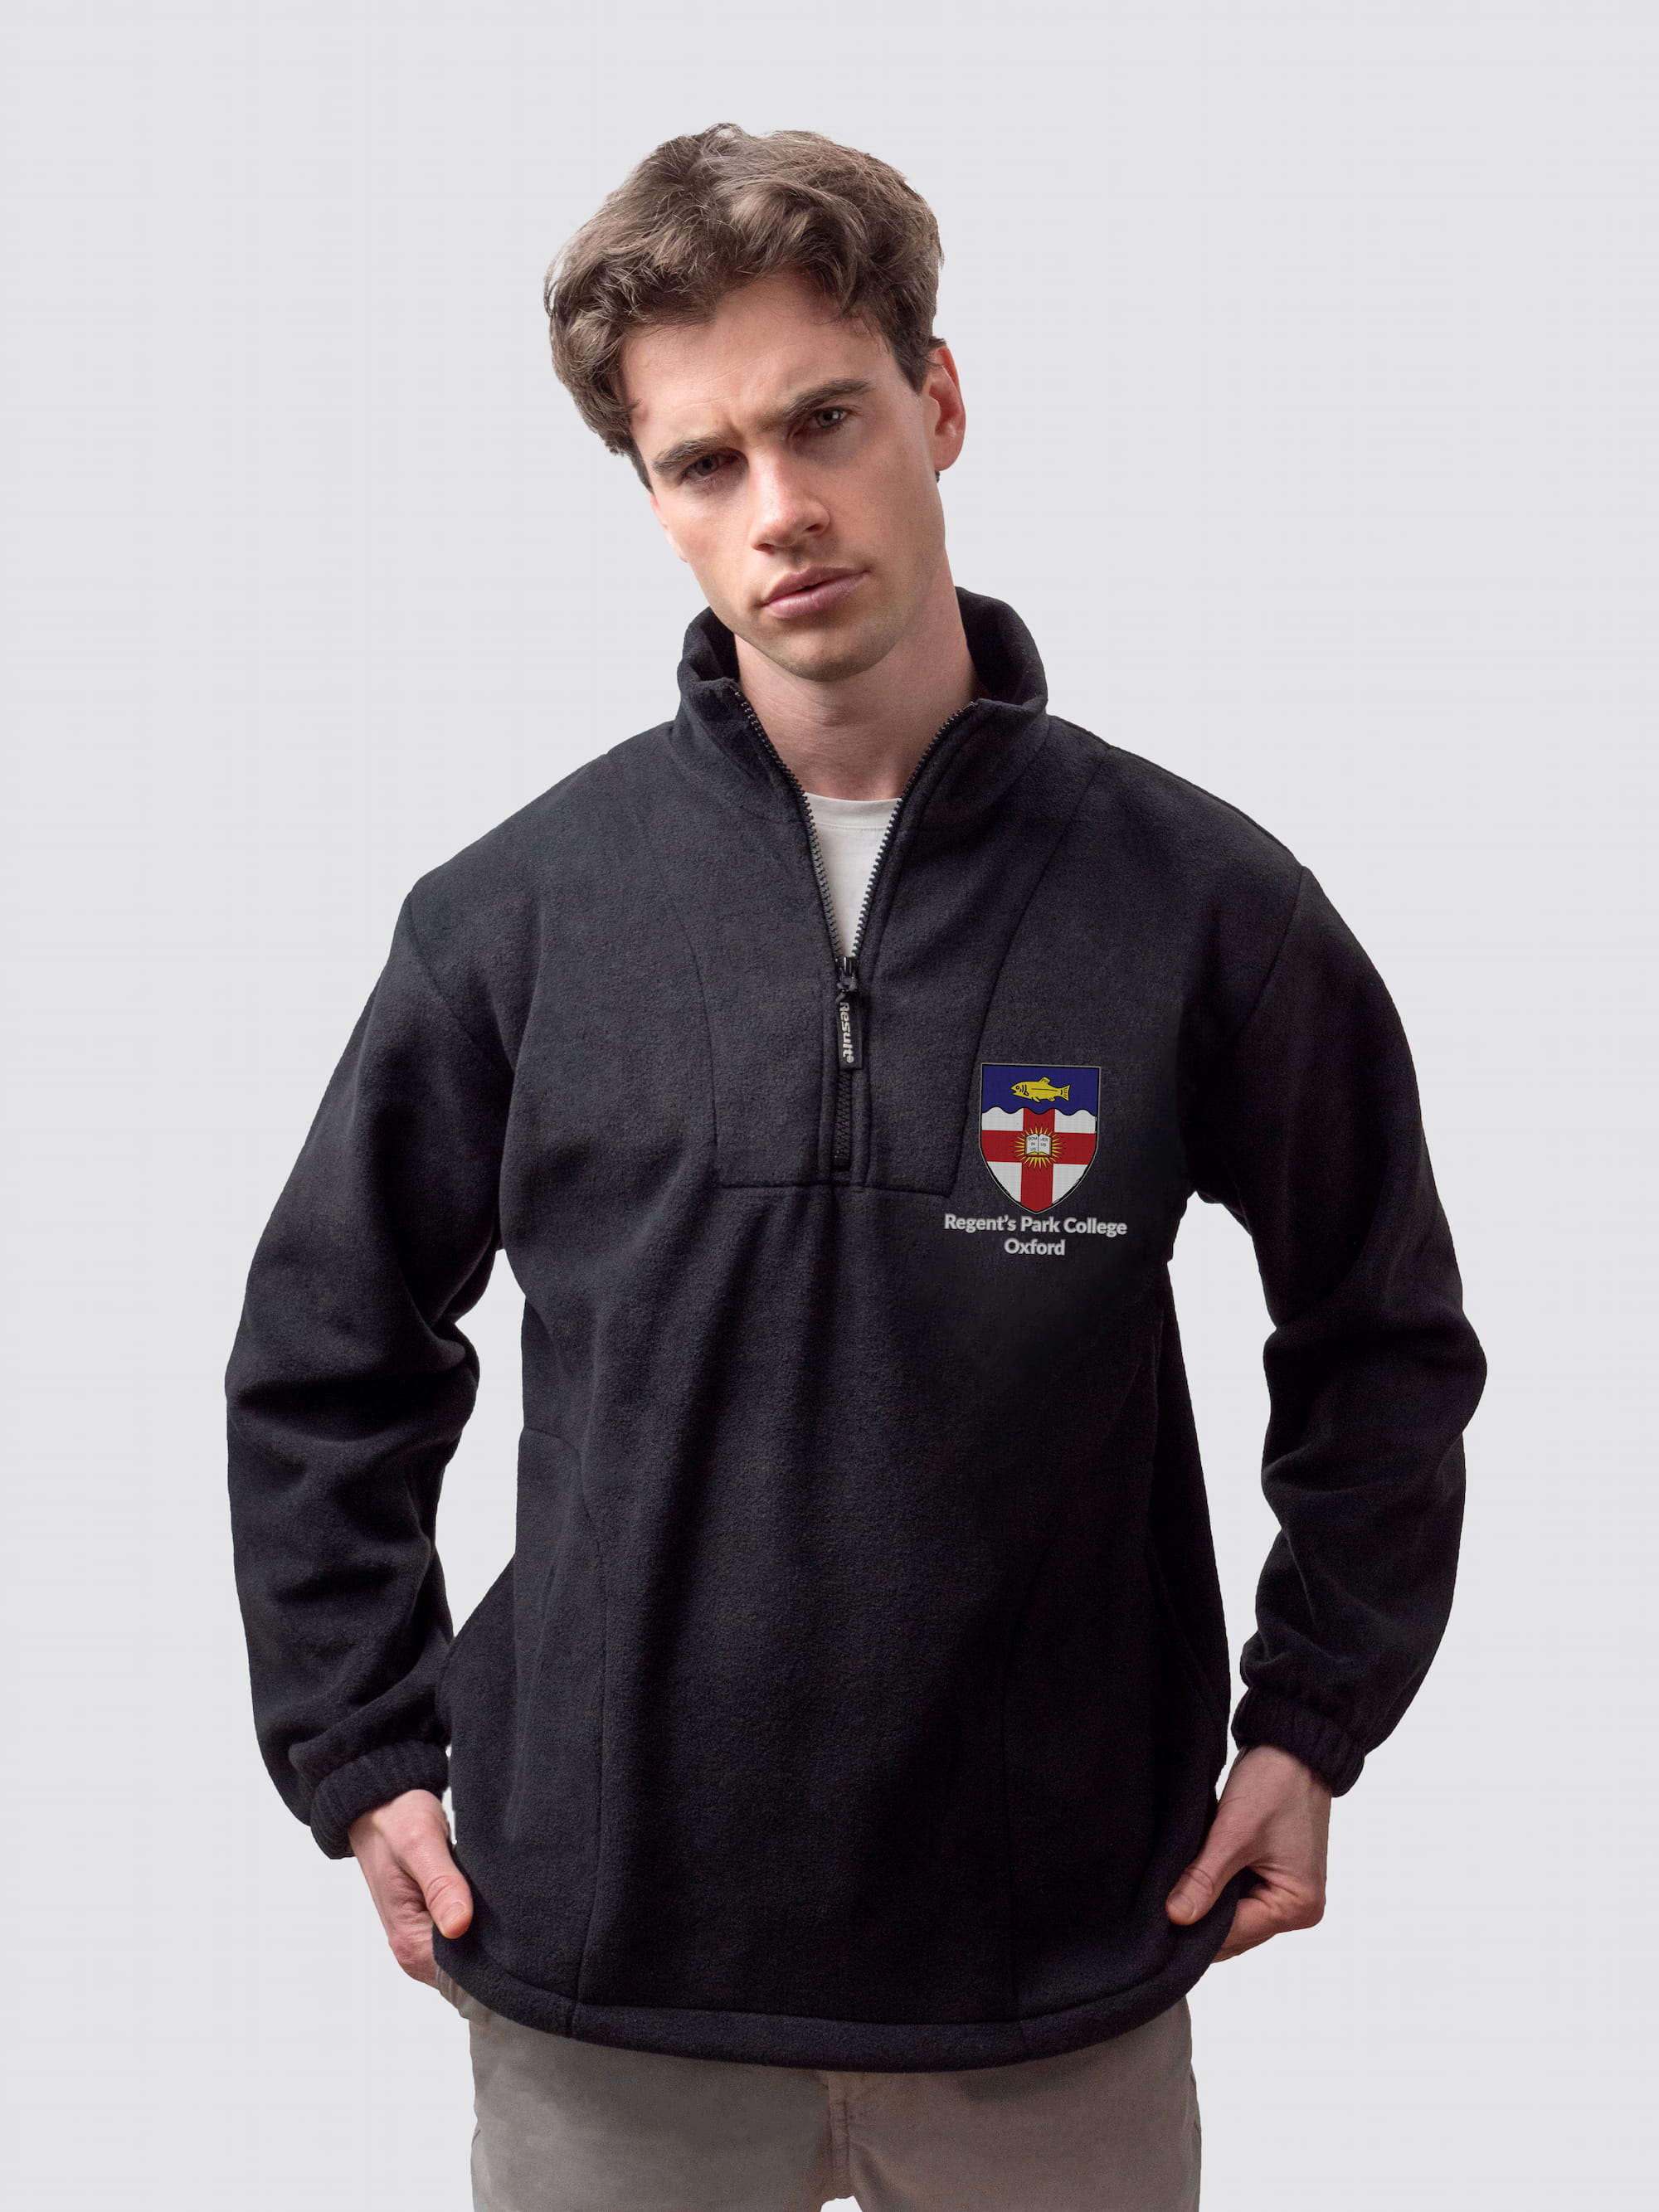 Oxford university fleece, with custom embroidered initials and Regent's Park crest